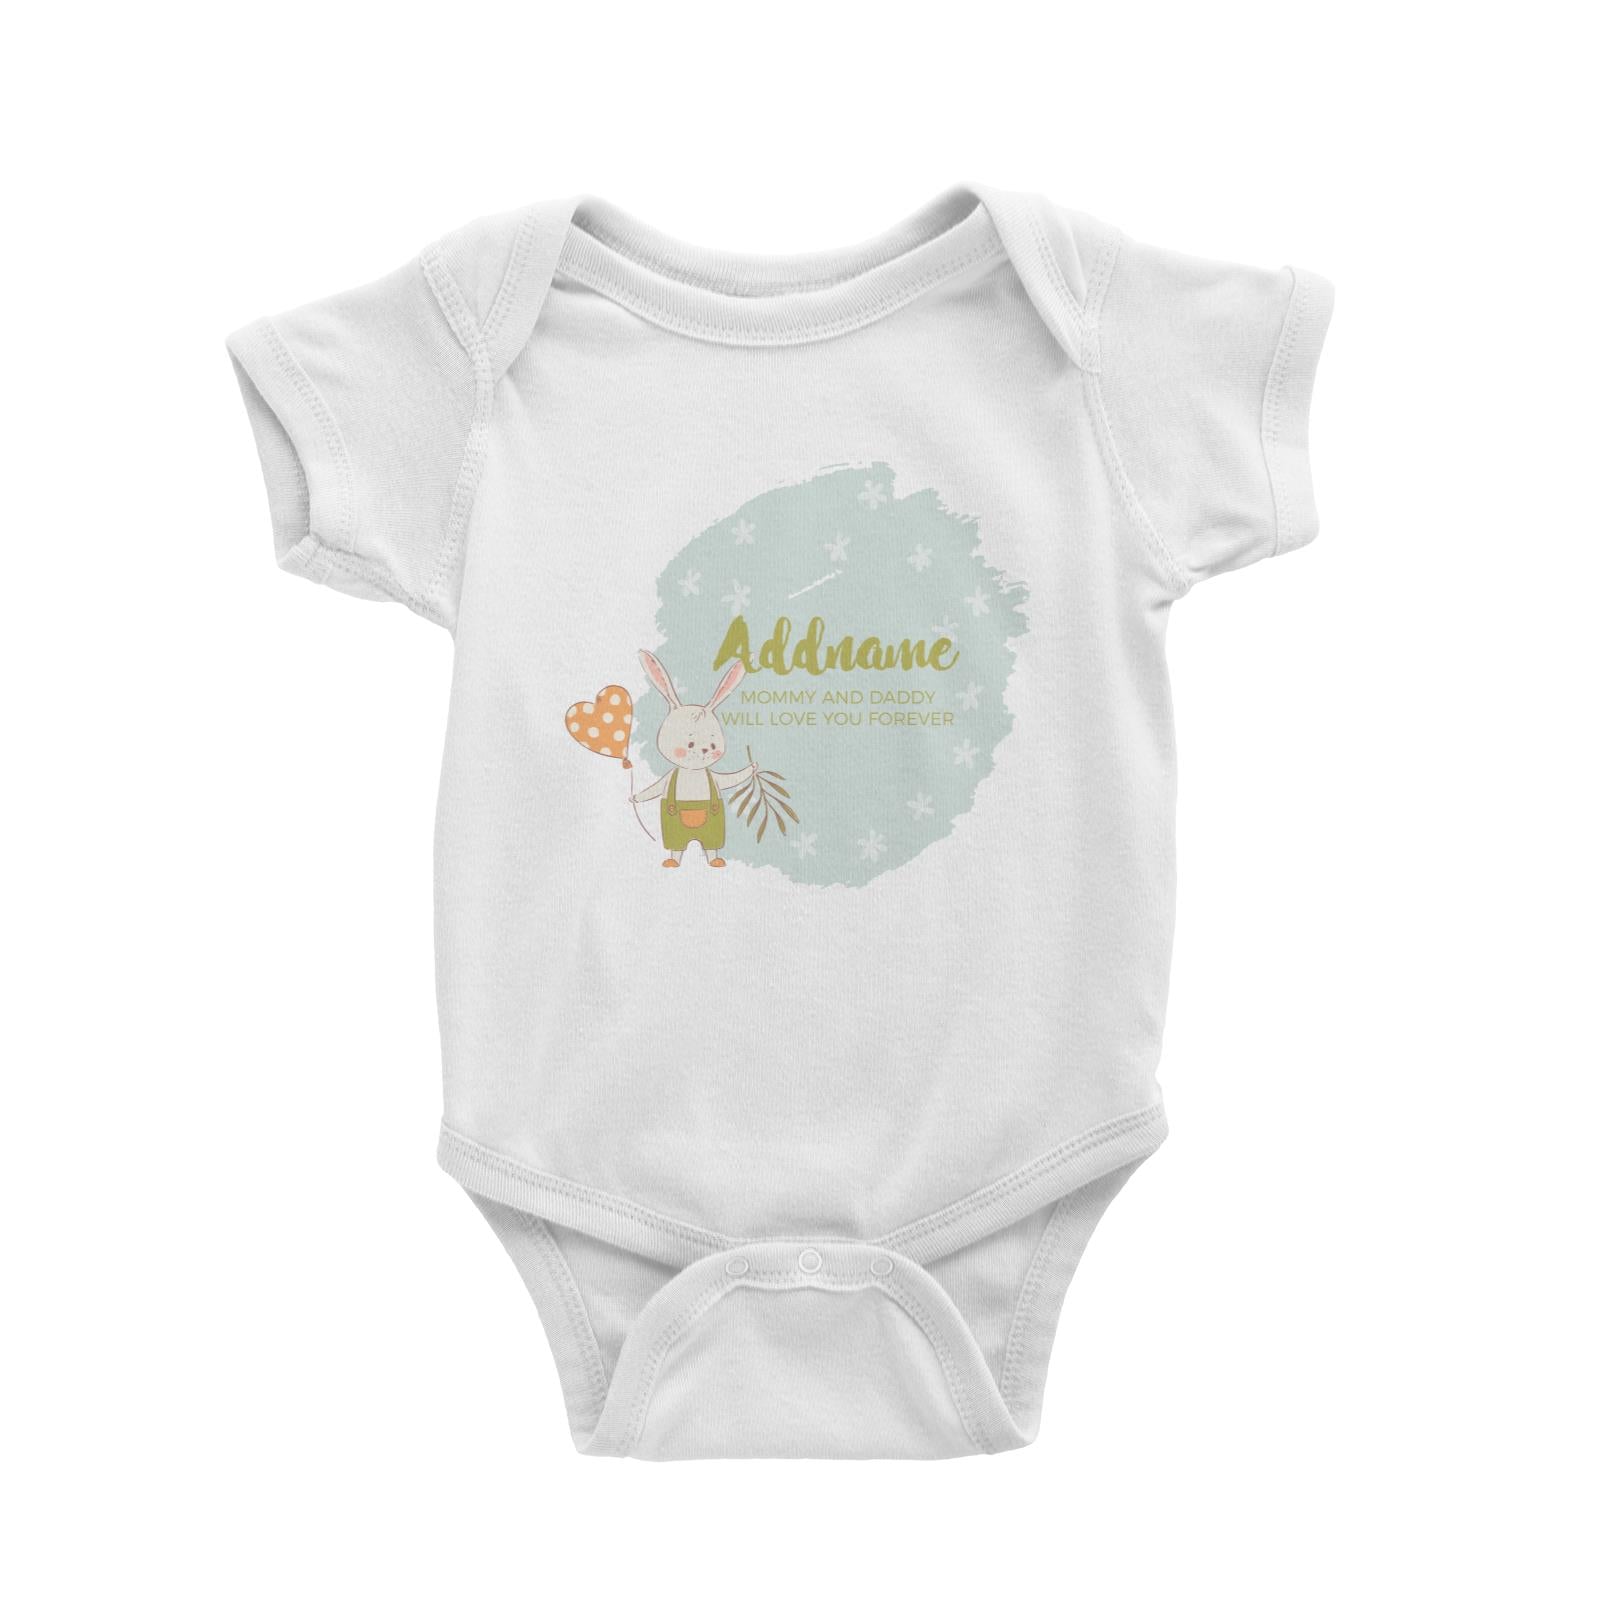 Cute Boy Rabbit with Heart Balloon Personalizable with Name and Text Baby Romper